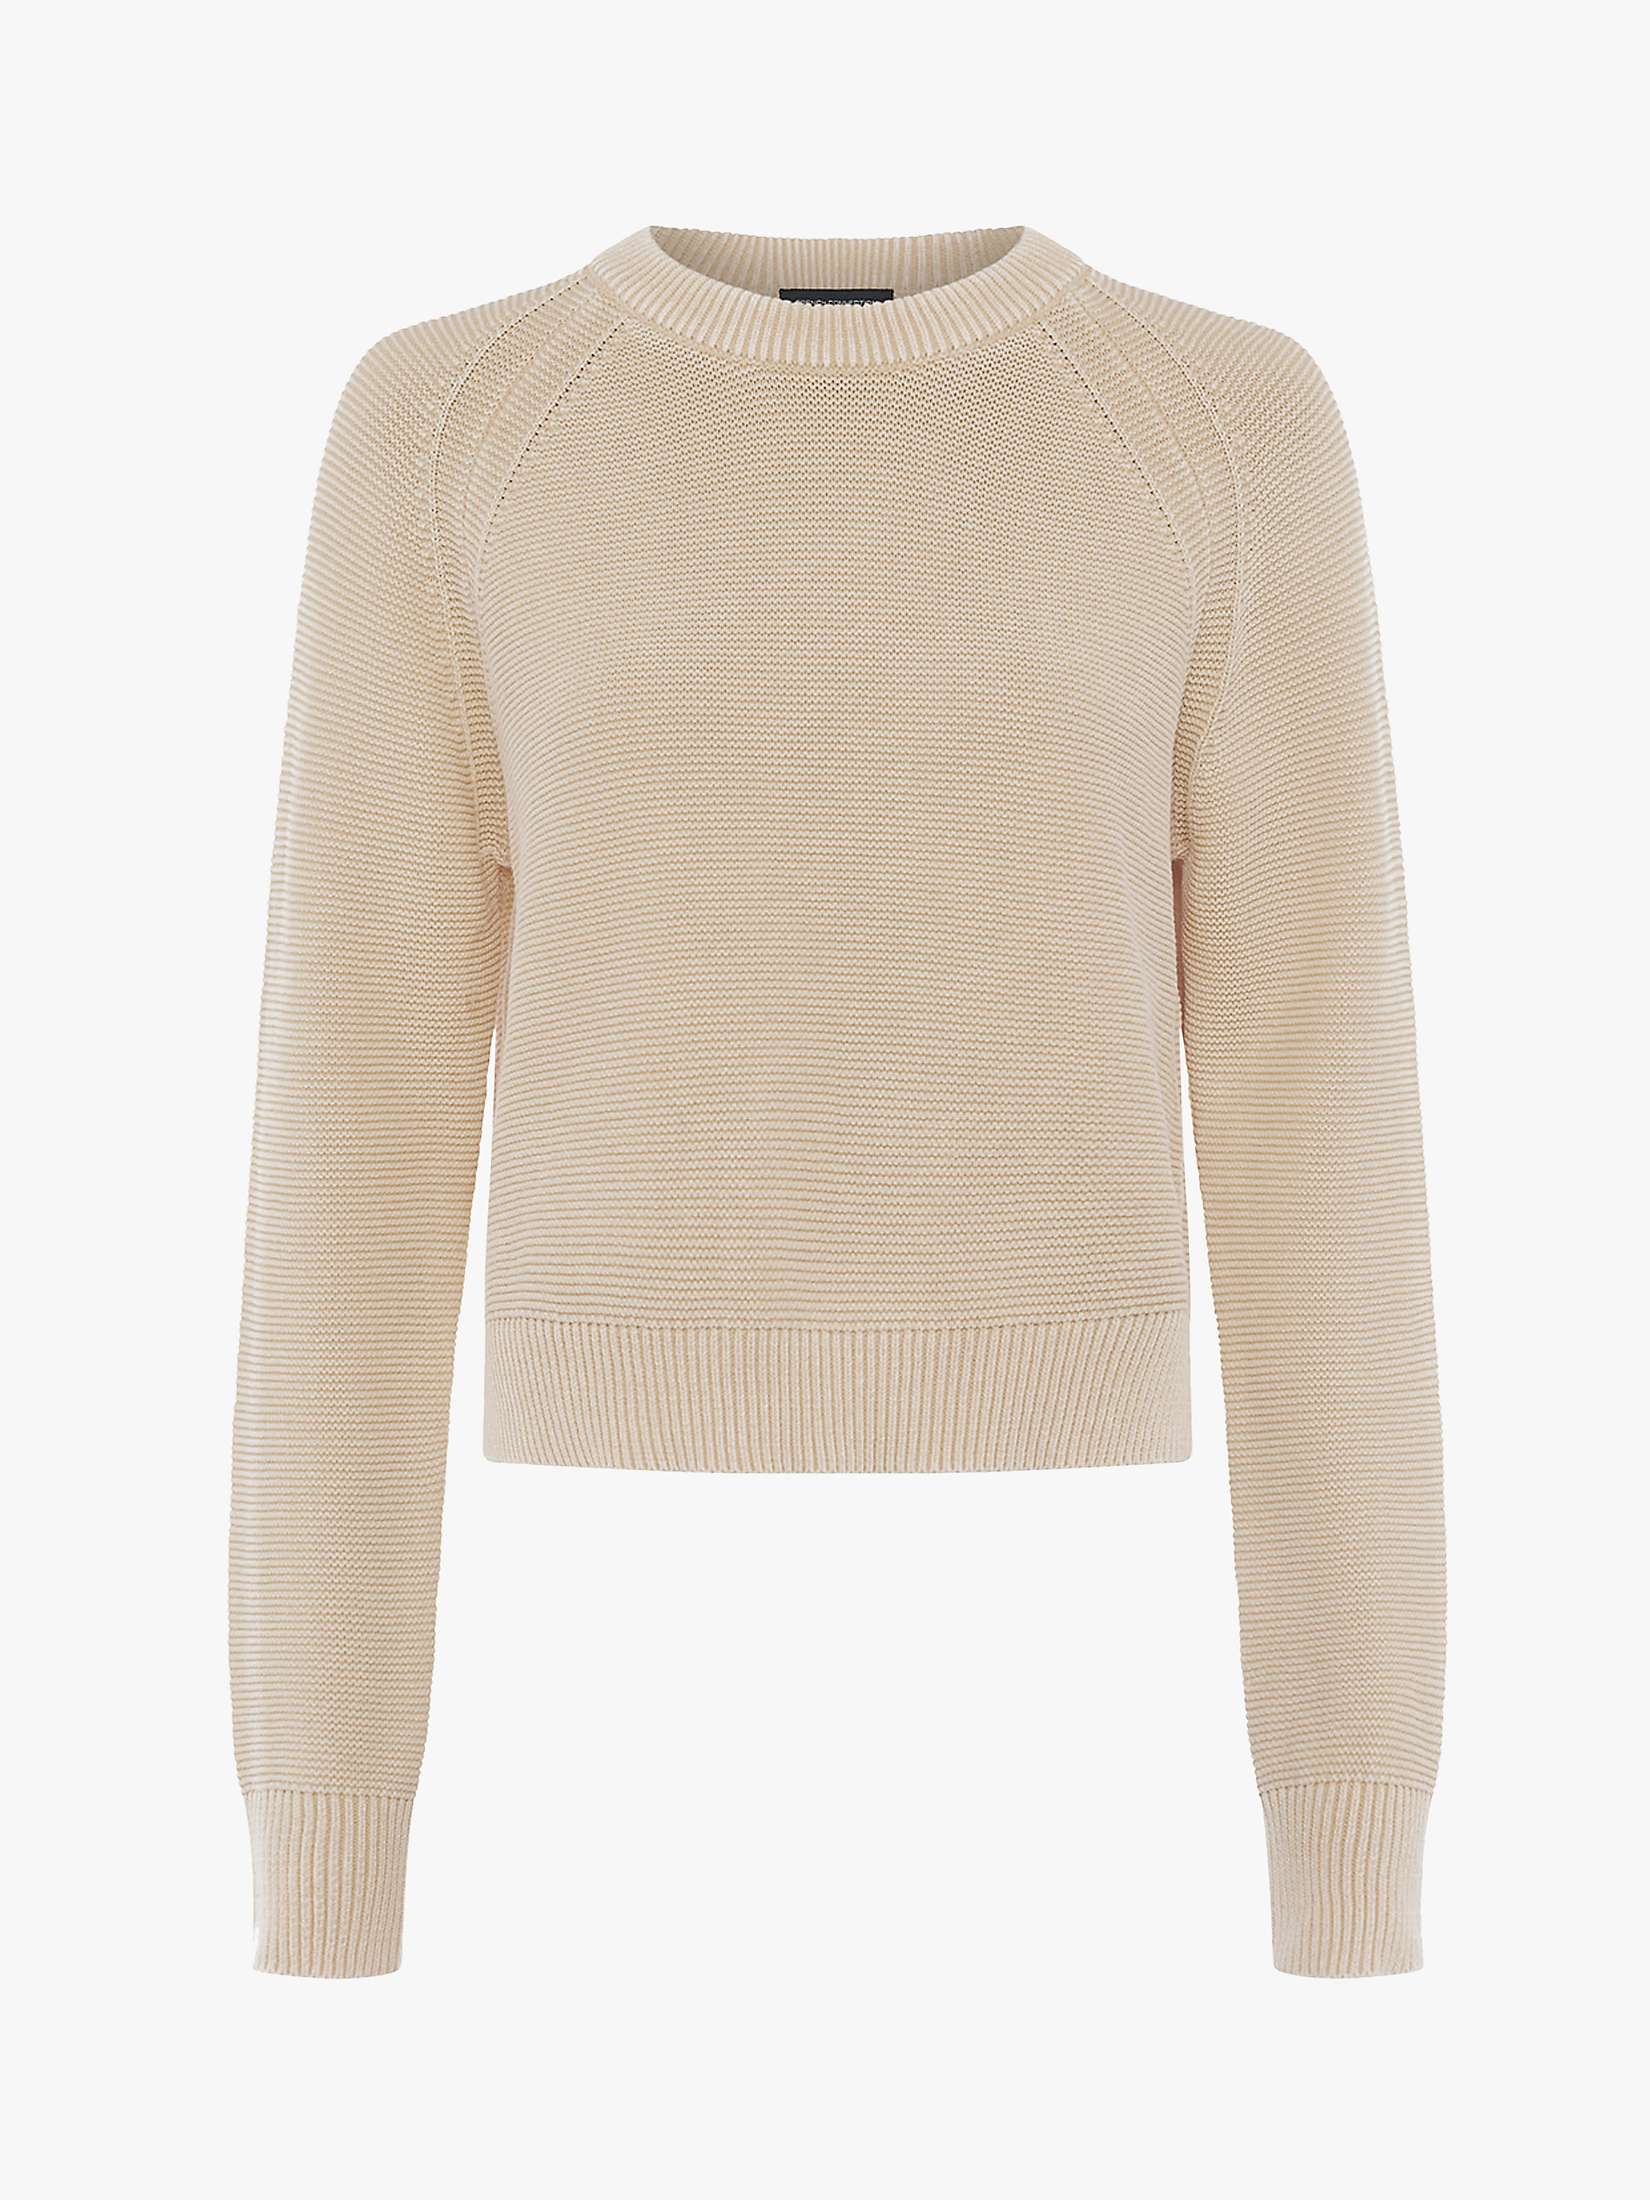 Buy French Connection Lilly Mozart Crew Neck Jumper Online at johnlewis.com